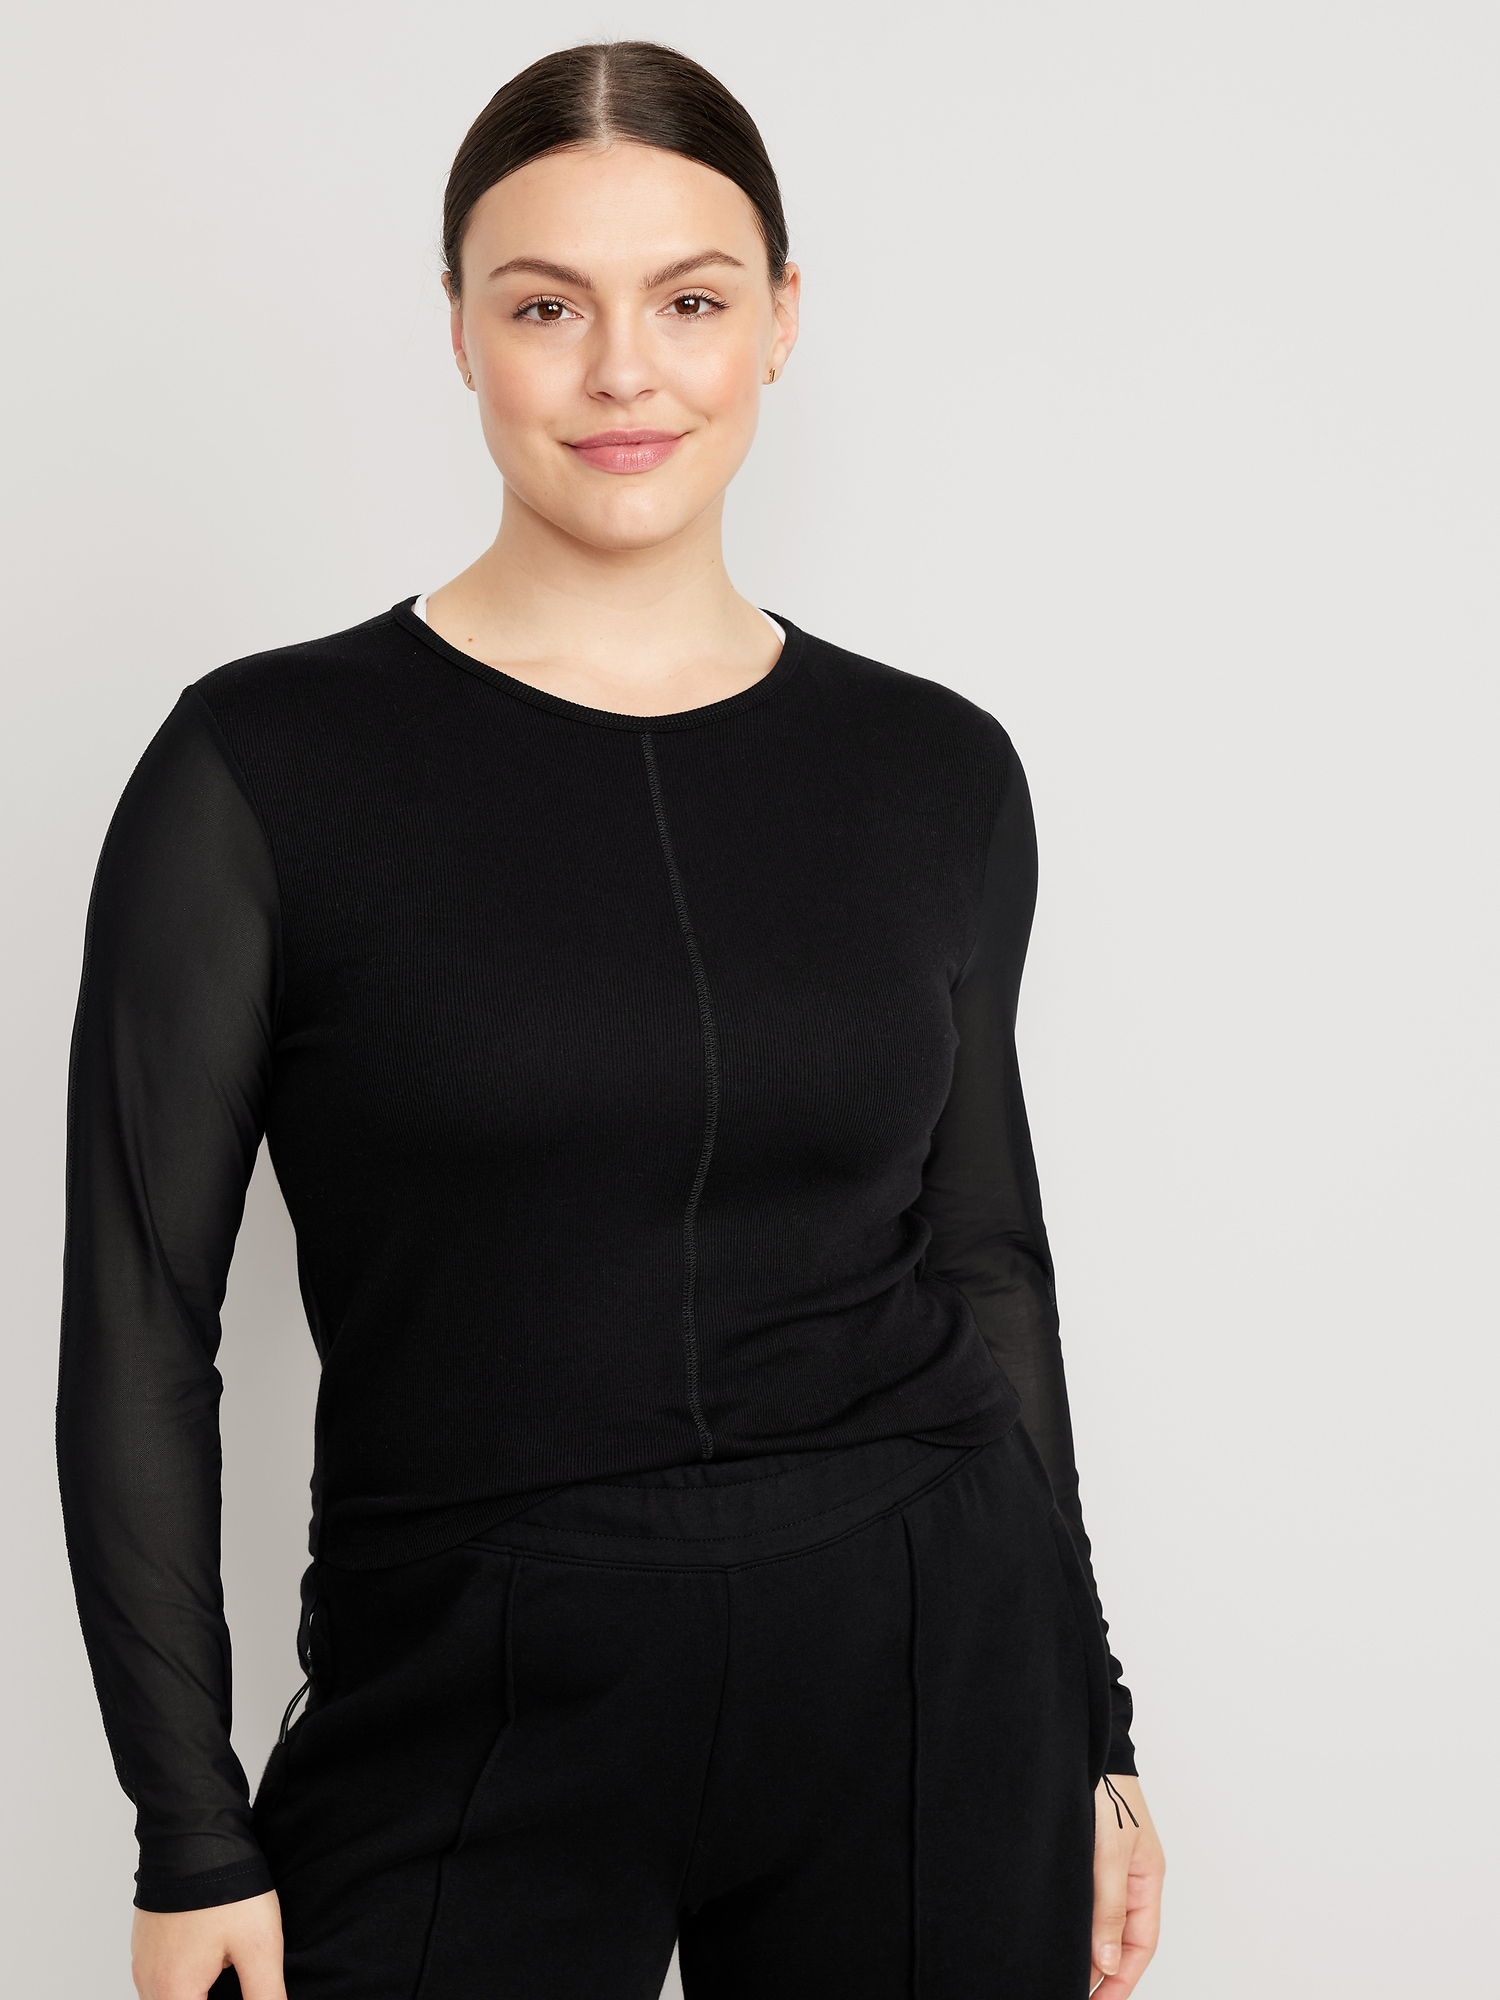 UltraLite Mesh-Sleeve Cropped Top for Women | Old Navy